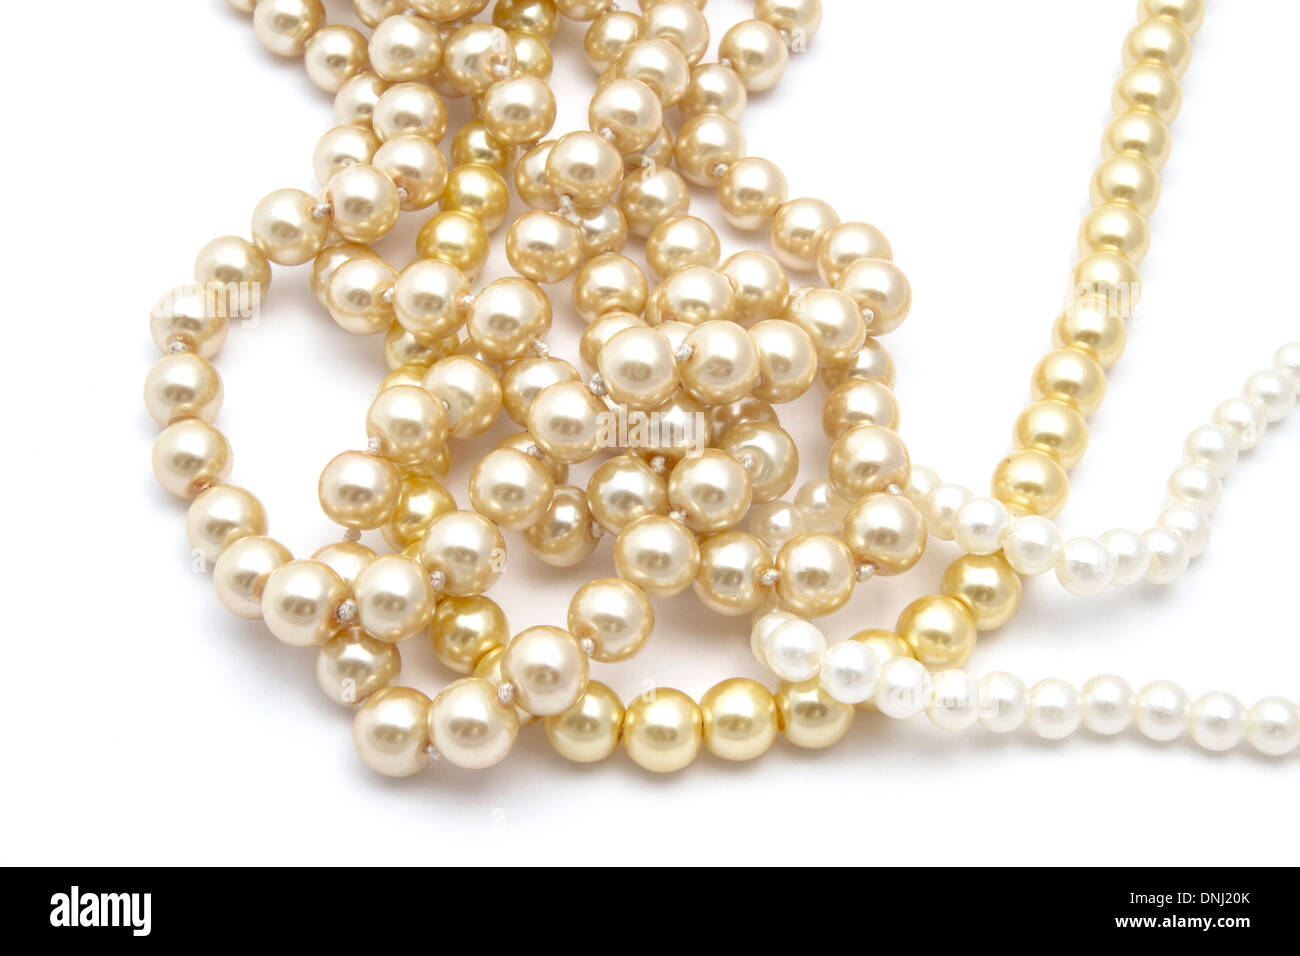 Beautiful string of beads isolated on white background Stock Photo